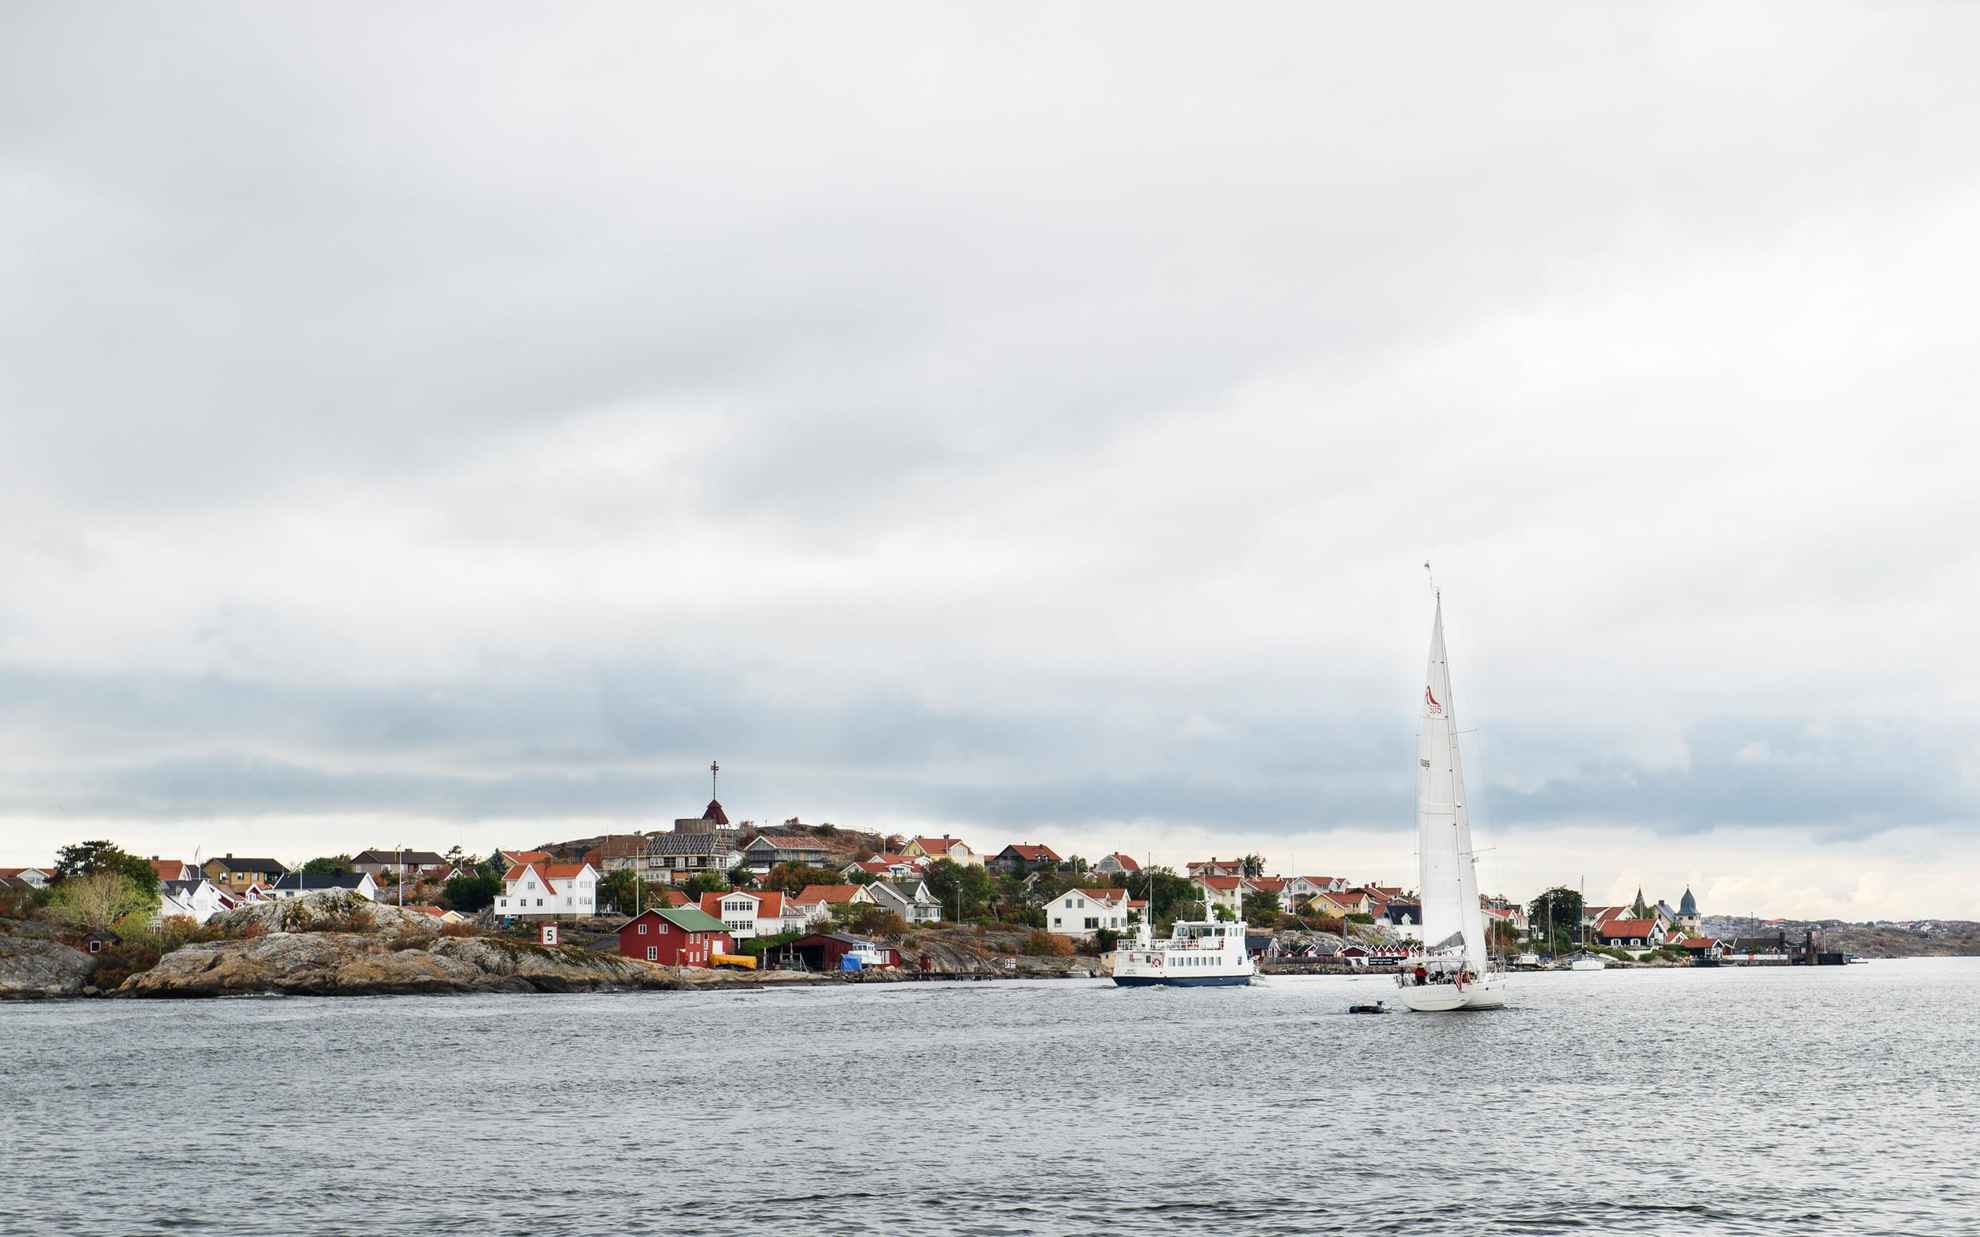 A small ferry and sailboat in the sea, passing by an island with many houses outside Gothenburg.